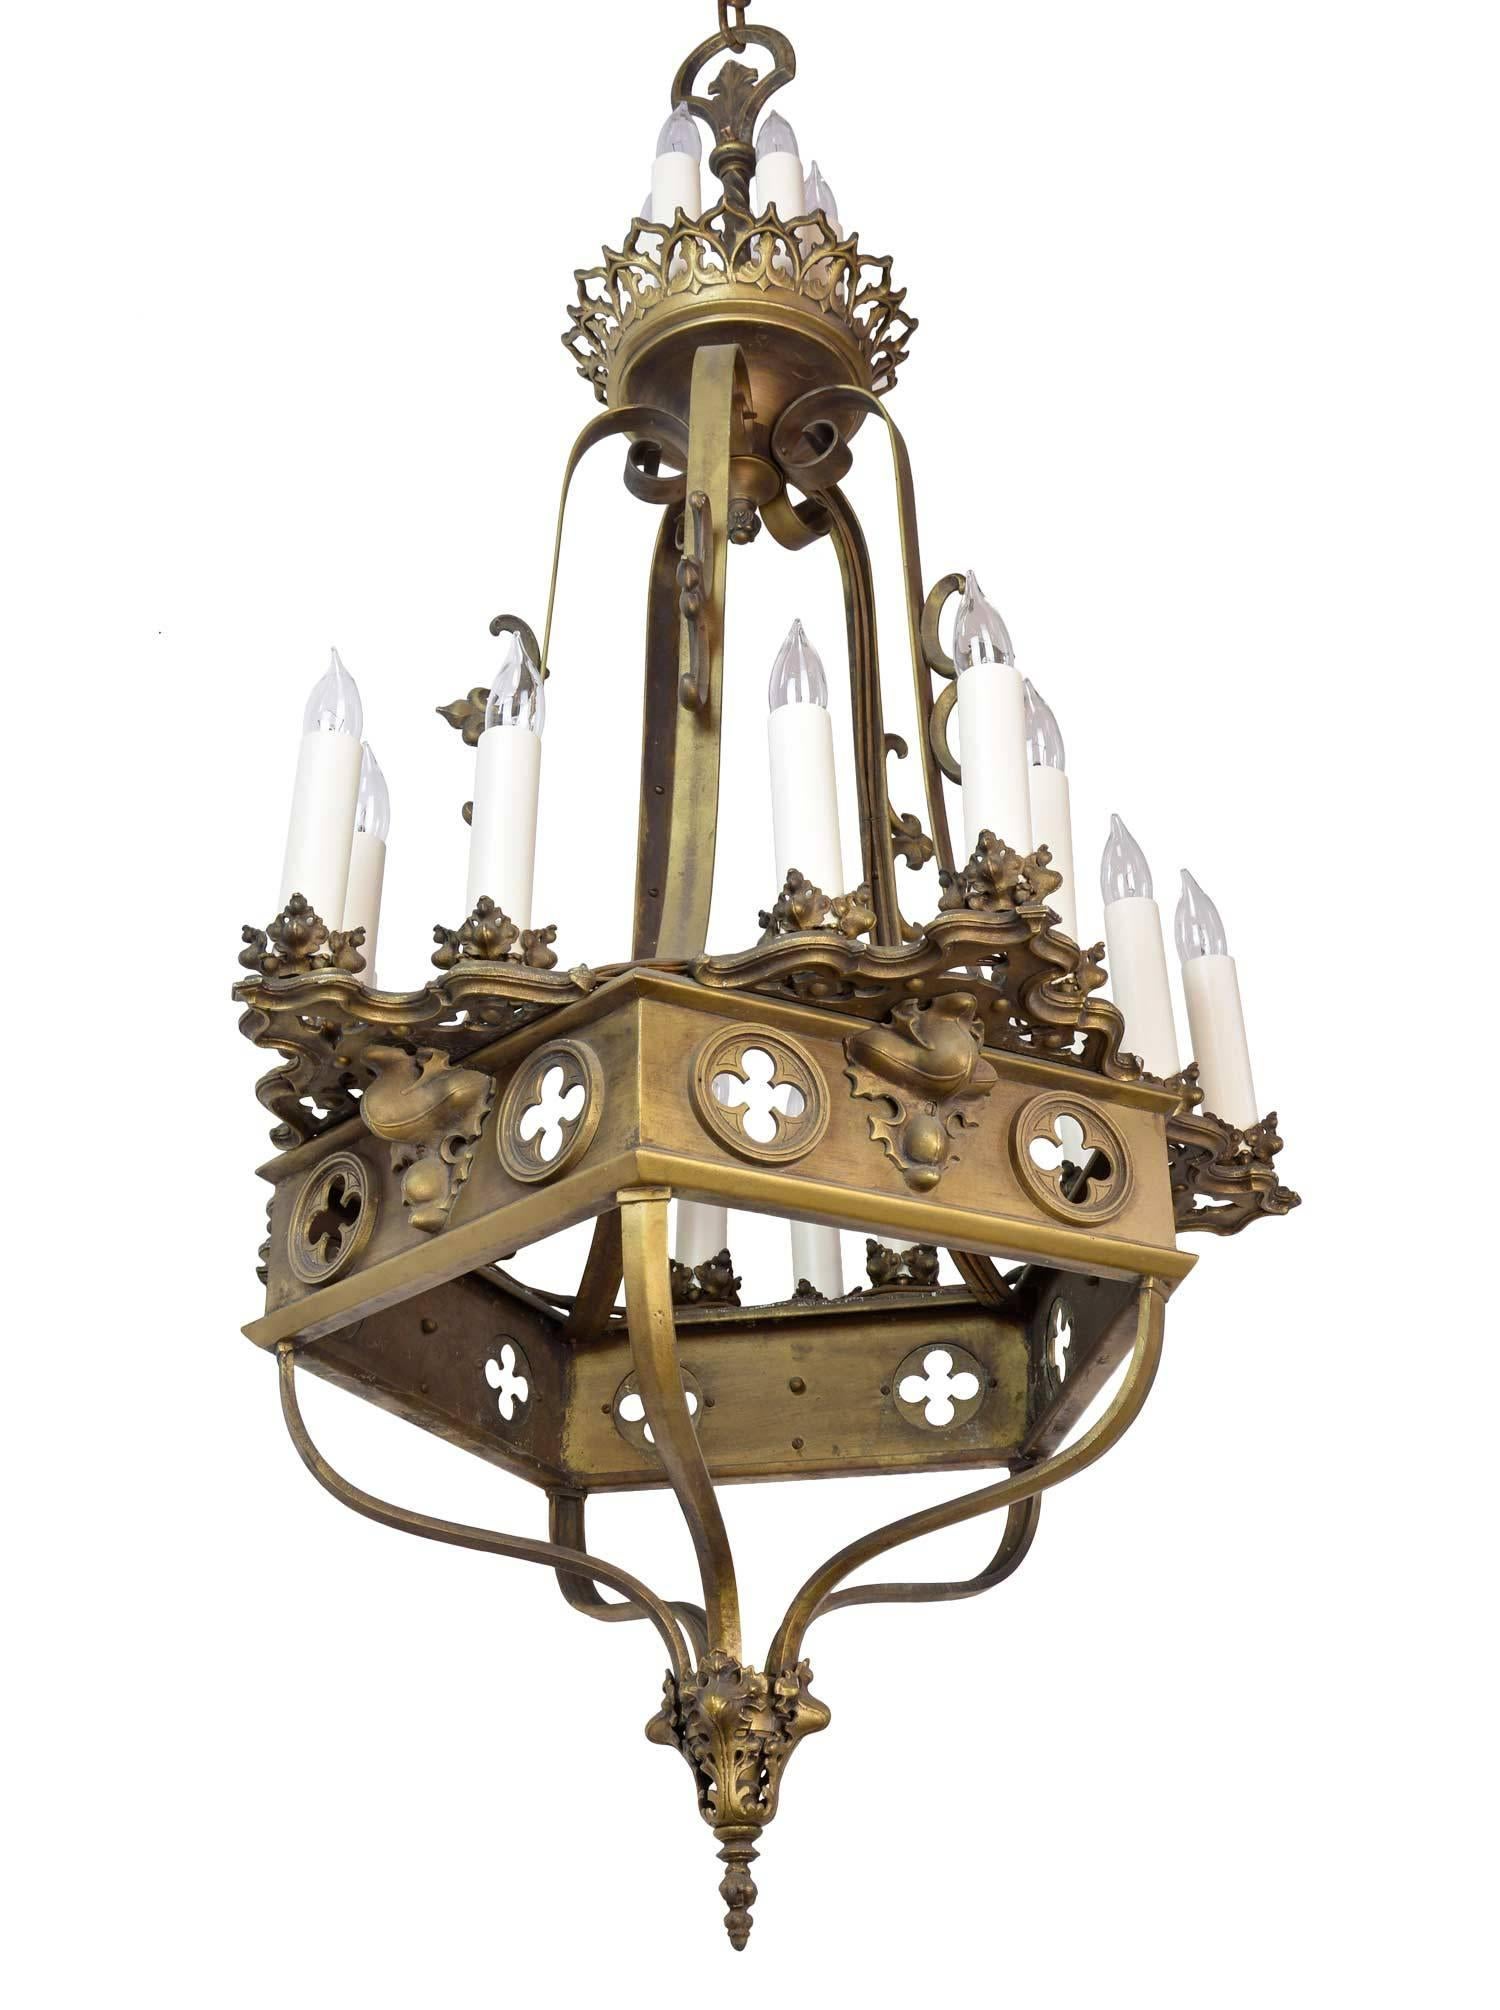 This extra large Gothic twenty-candle tiered chandelier is made from cast aluminium and painted antique brass (original finish). Each chandelier features all the standard Gothic motifs; quatrefoils, trifold and crockets. Made around 1935, they are